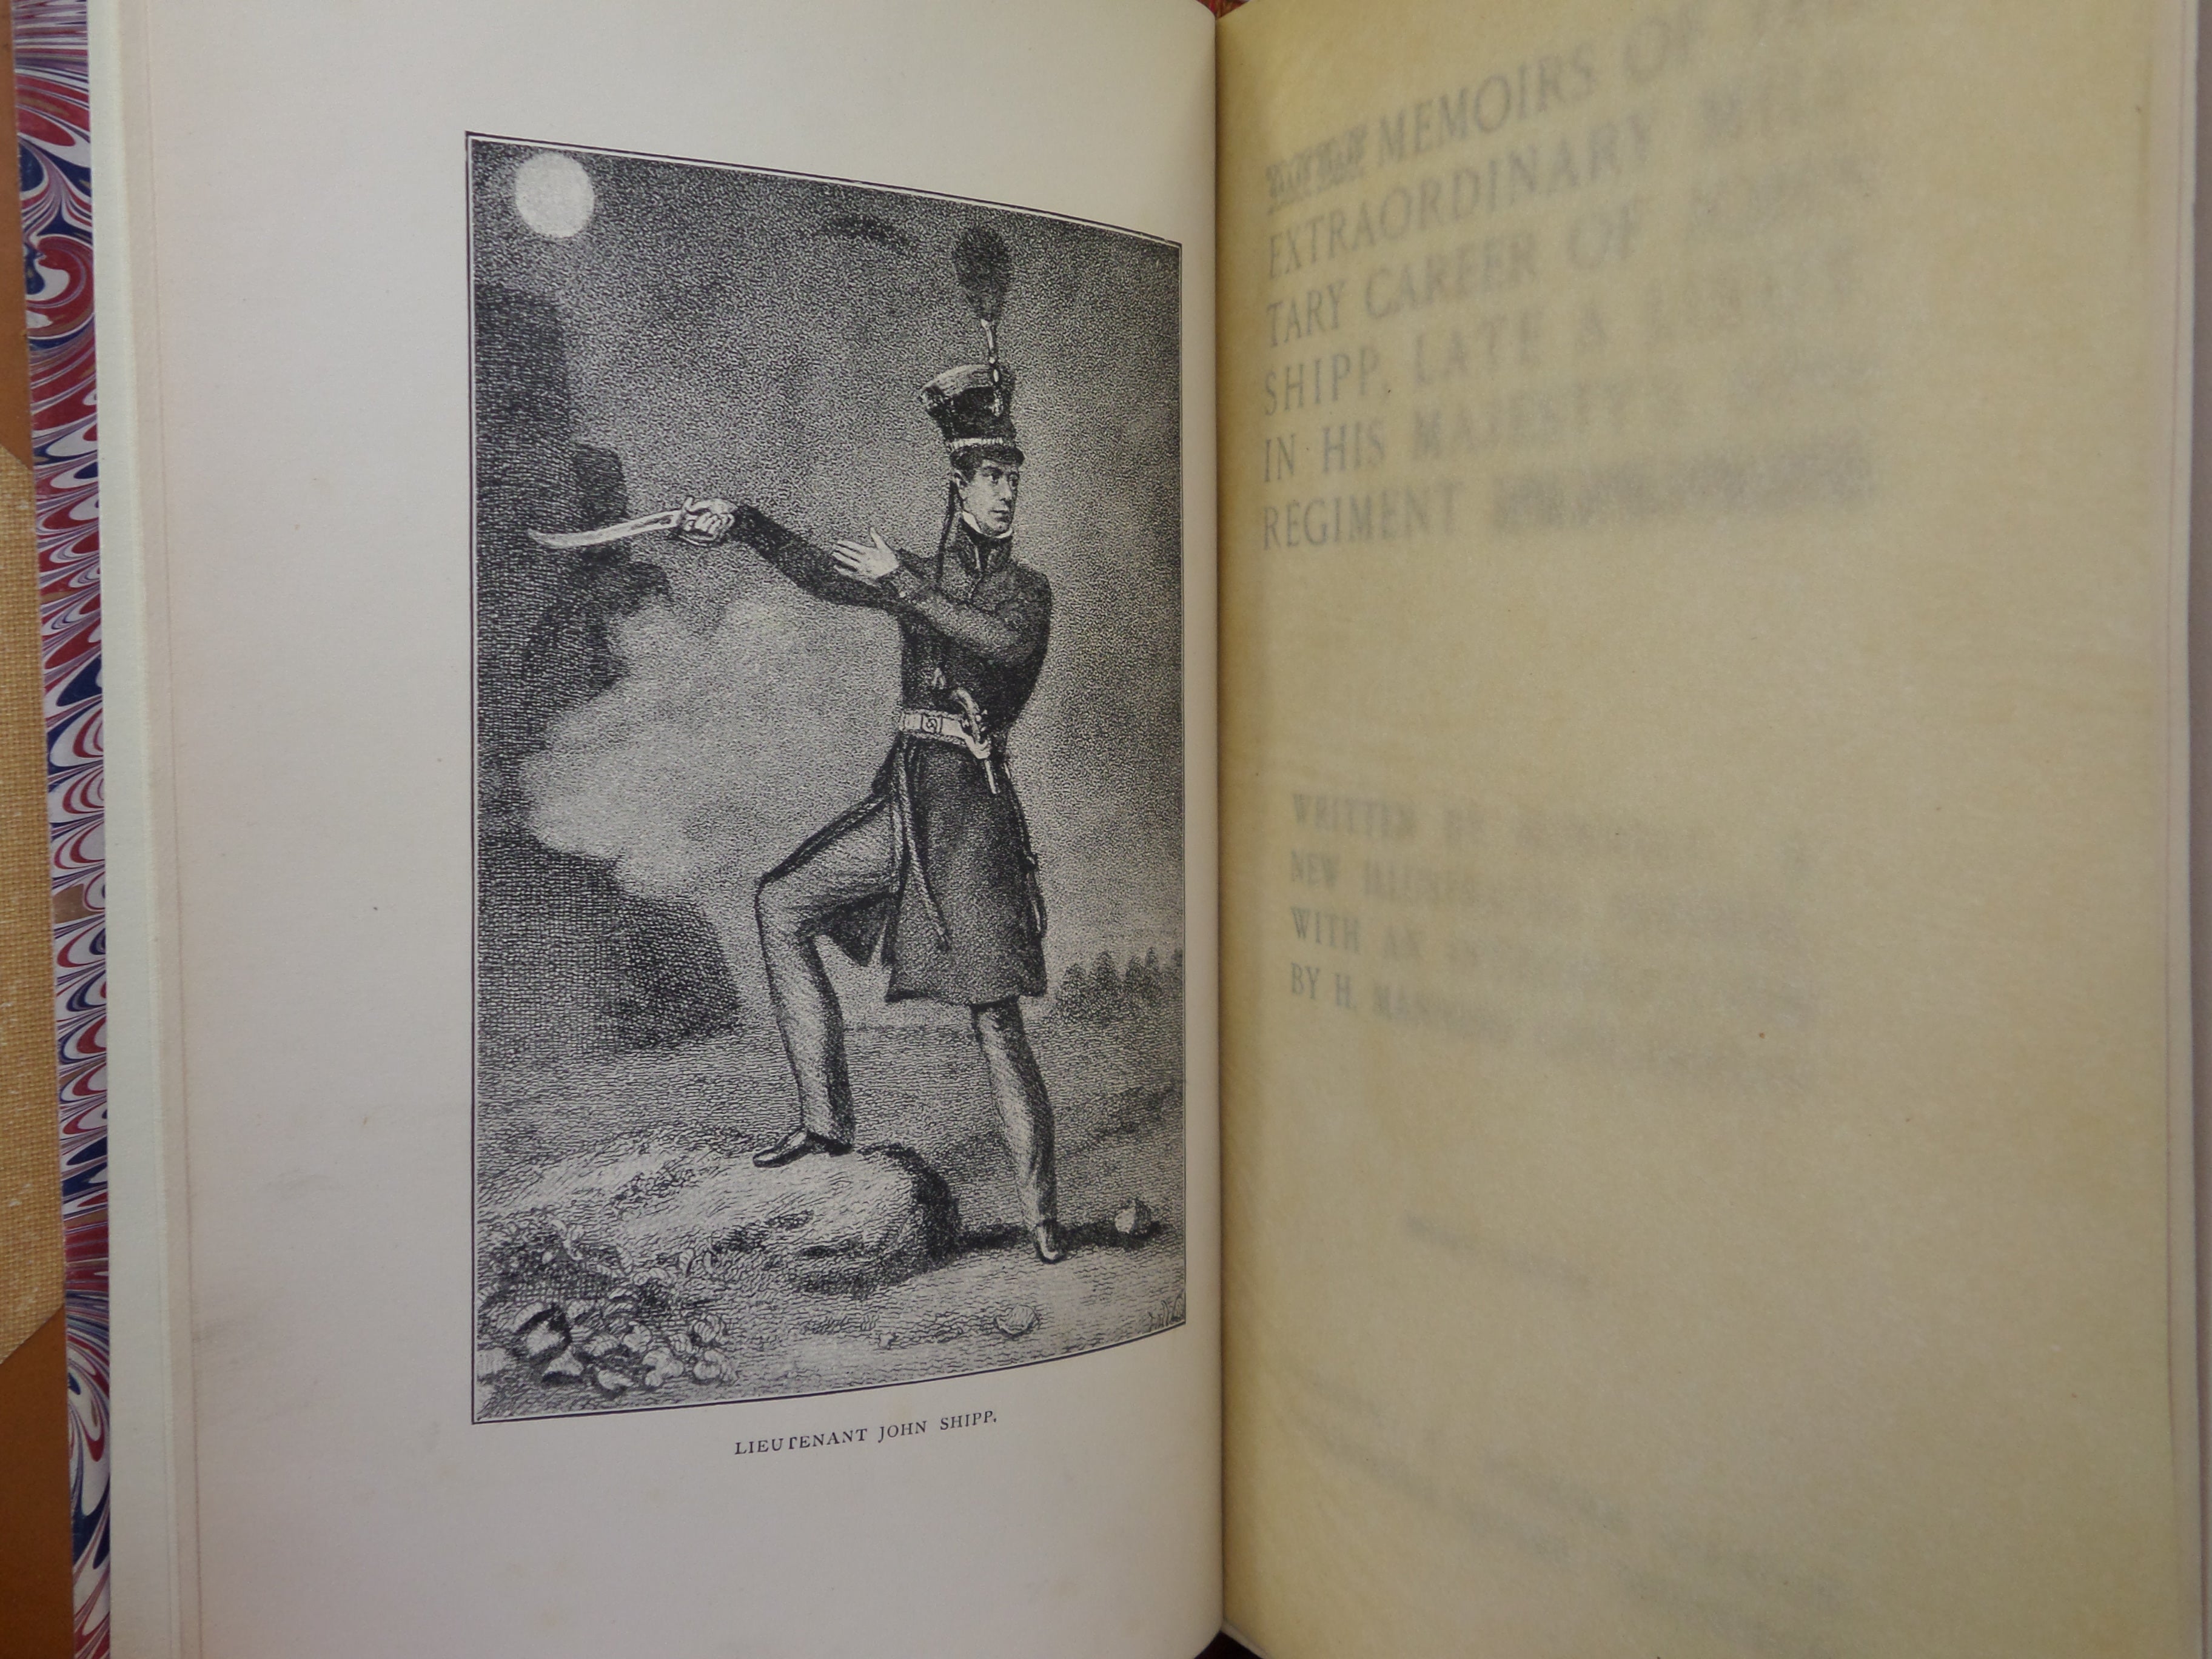 MEMOIRS OF THE EXTRAORDINARY MILITARY CAREER OF JOHN SHIPP 1894 FIRST EDITION FINELY BOUND BY BAYNTUN-RIVIERE